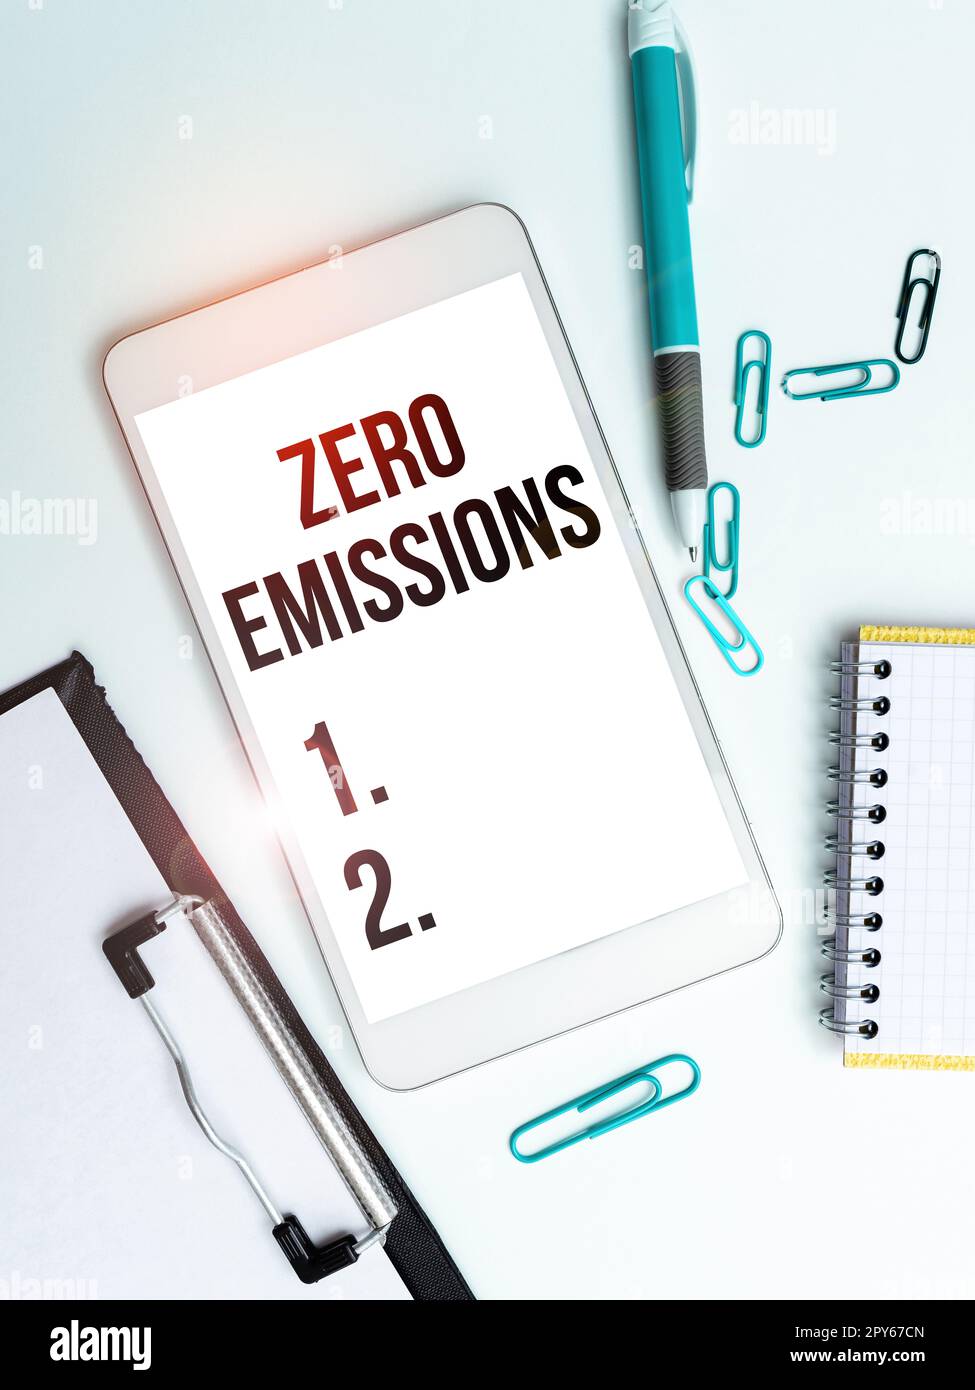 Writing displaying text Zero Emissions. Word Written on emits no waste products that pollute the environment Stock Photo